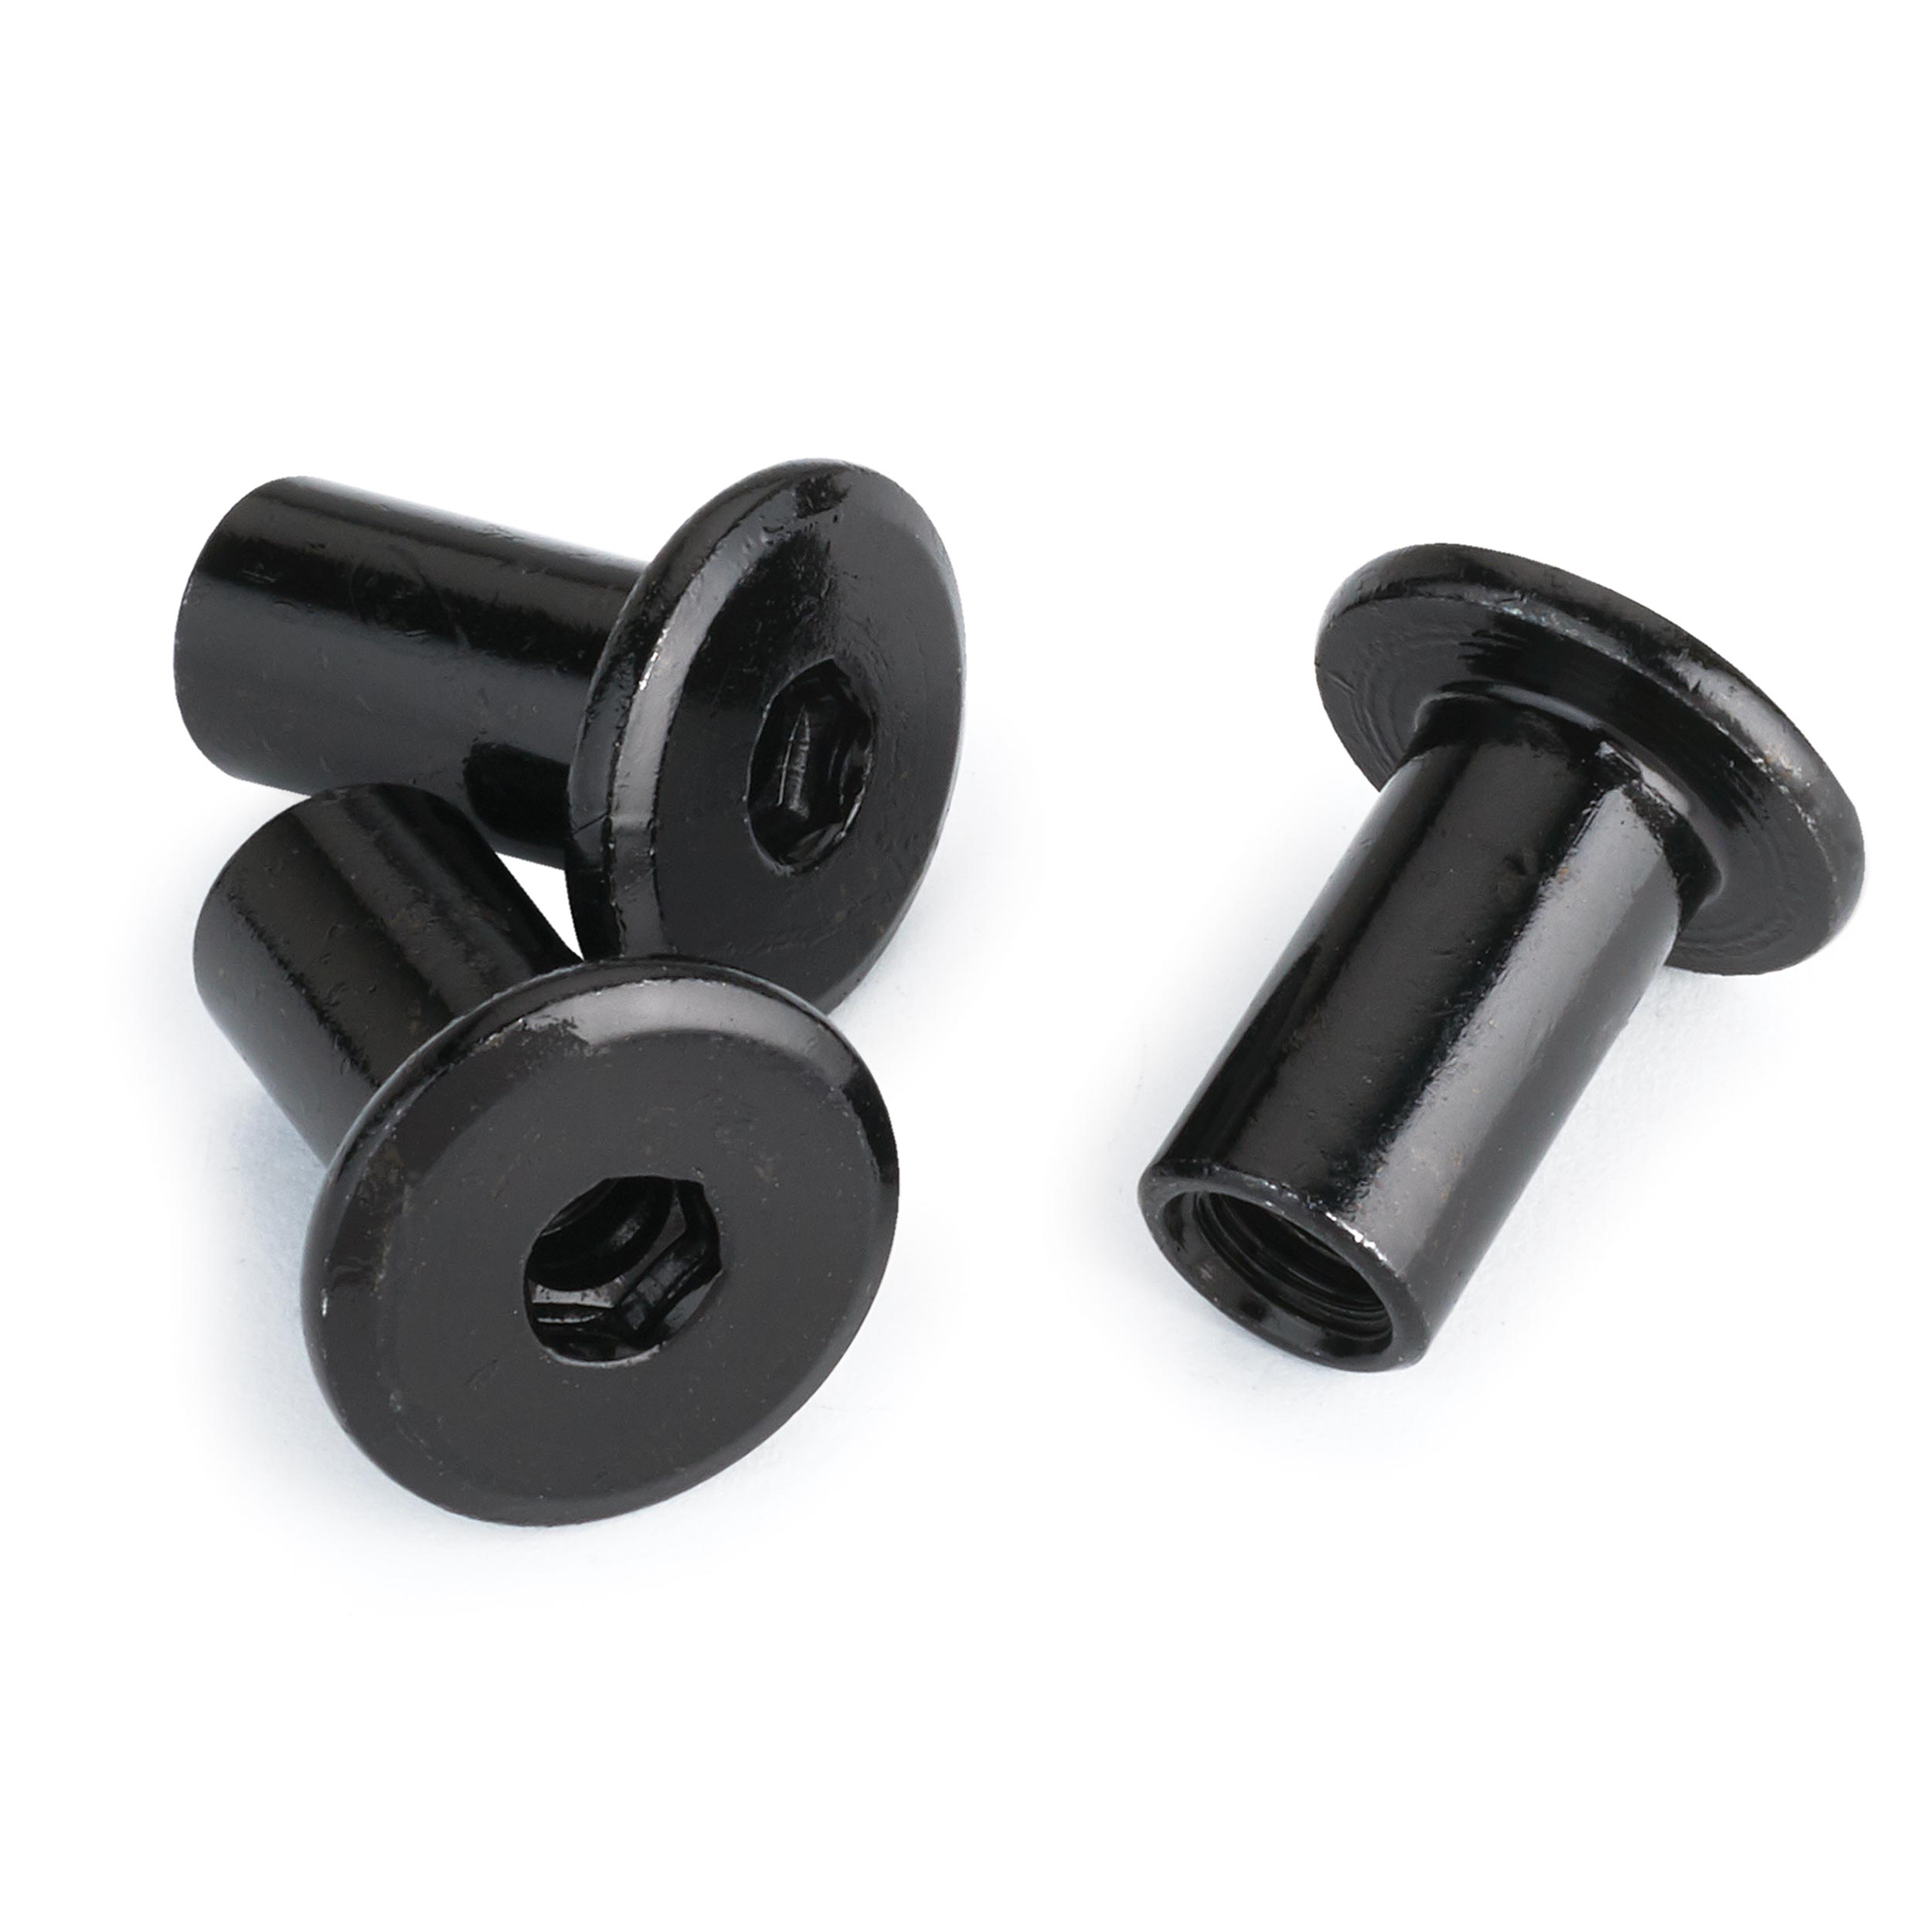 Knock Down 1/4 X 20 Joint Connector Cap Nut 8-piece